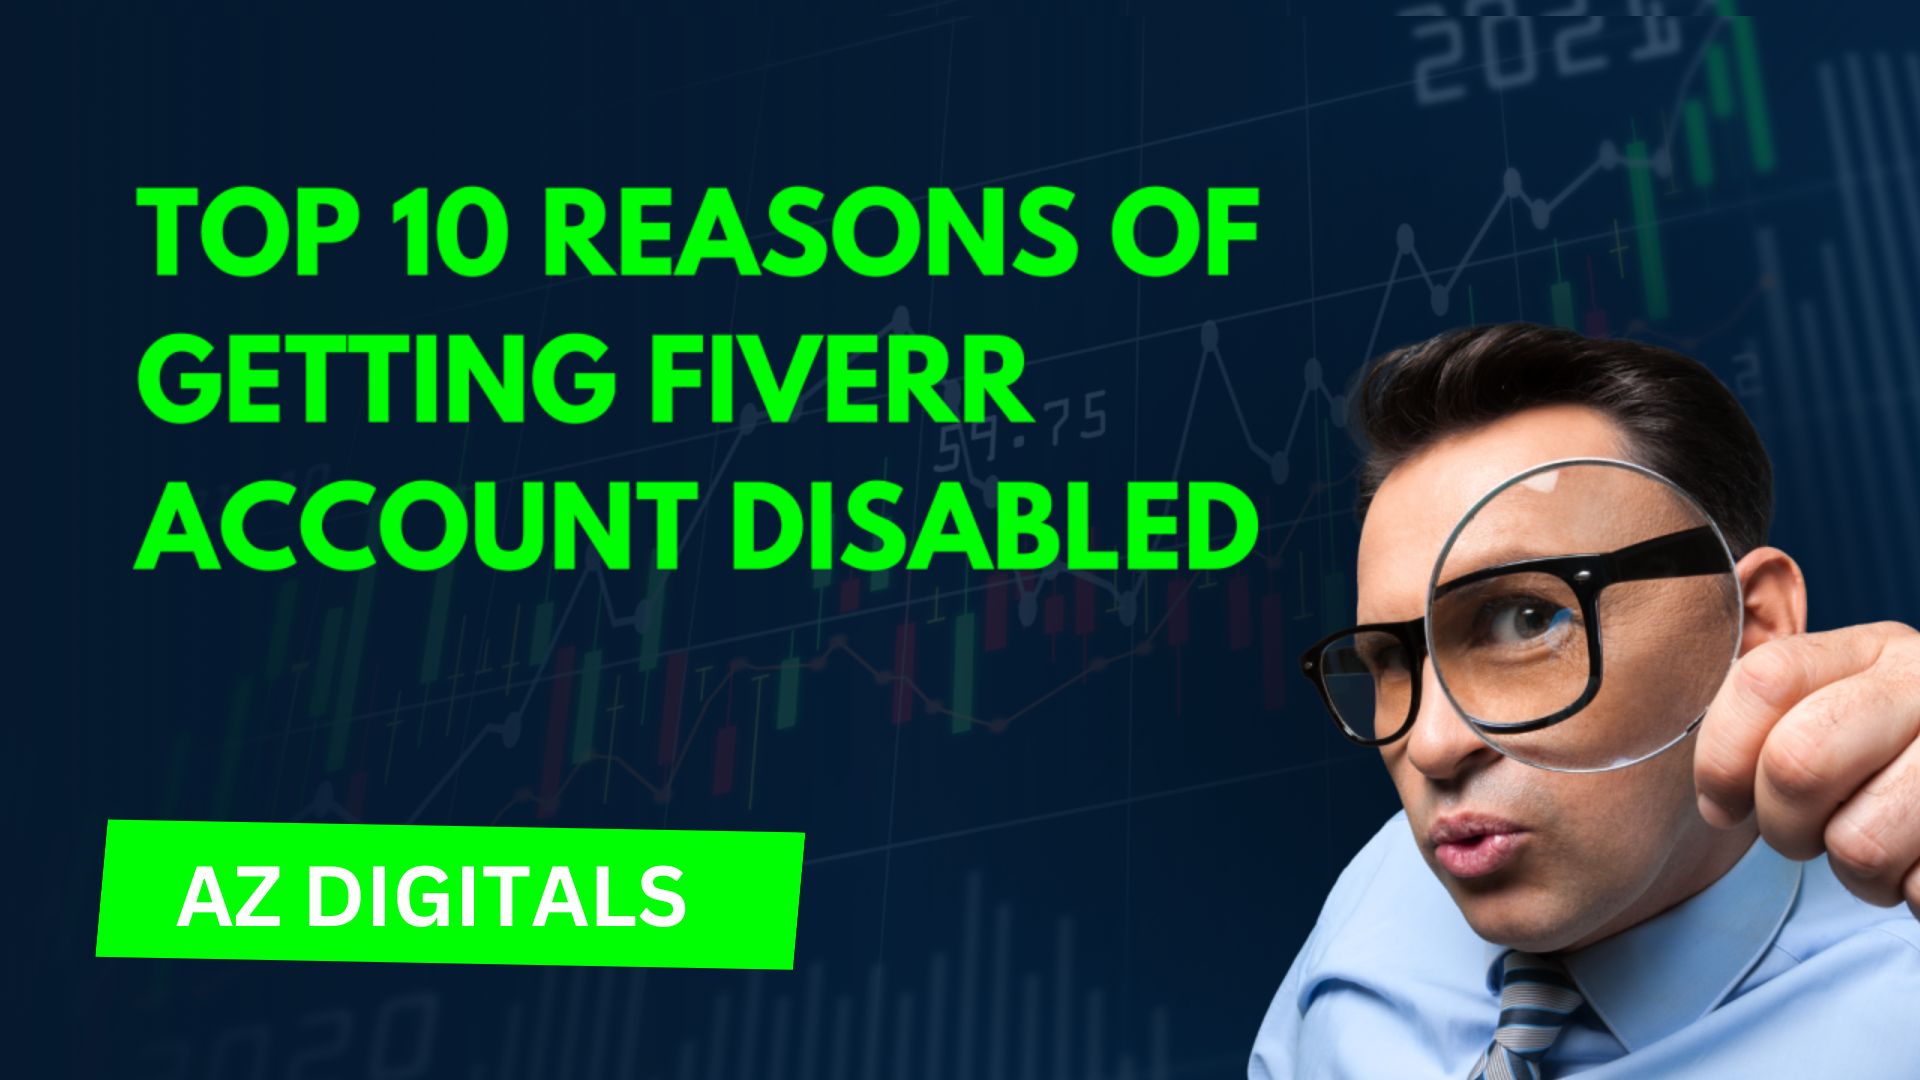 Top 10 Common Reasons for Fiverr Account Suspension